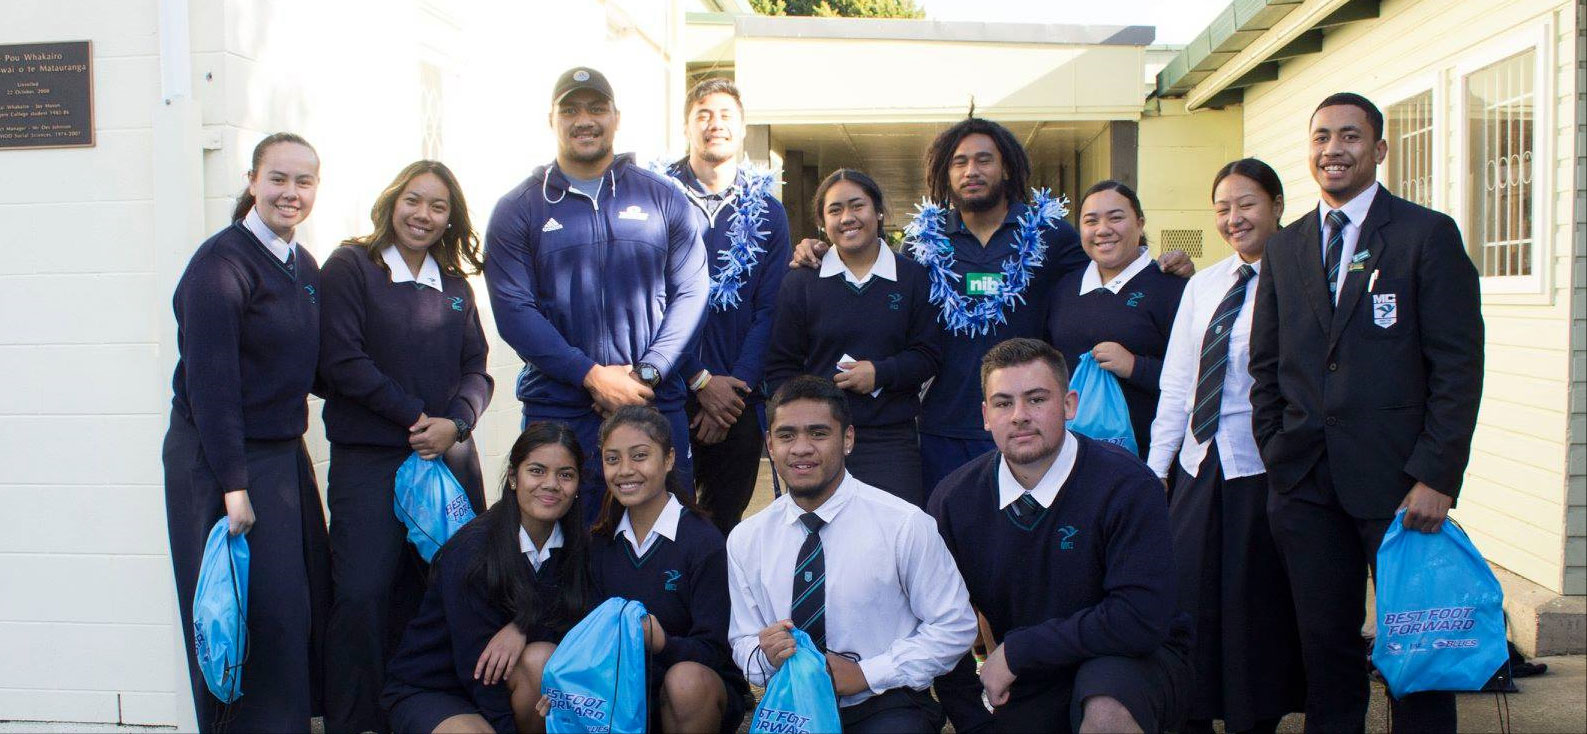 Blues player and All Black, Ofa Tu’ungafasi, returns to his kura Māngere College, to gift several pairs of Blues rugby boots and to connect  with current students and his former teachers